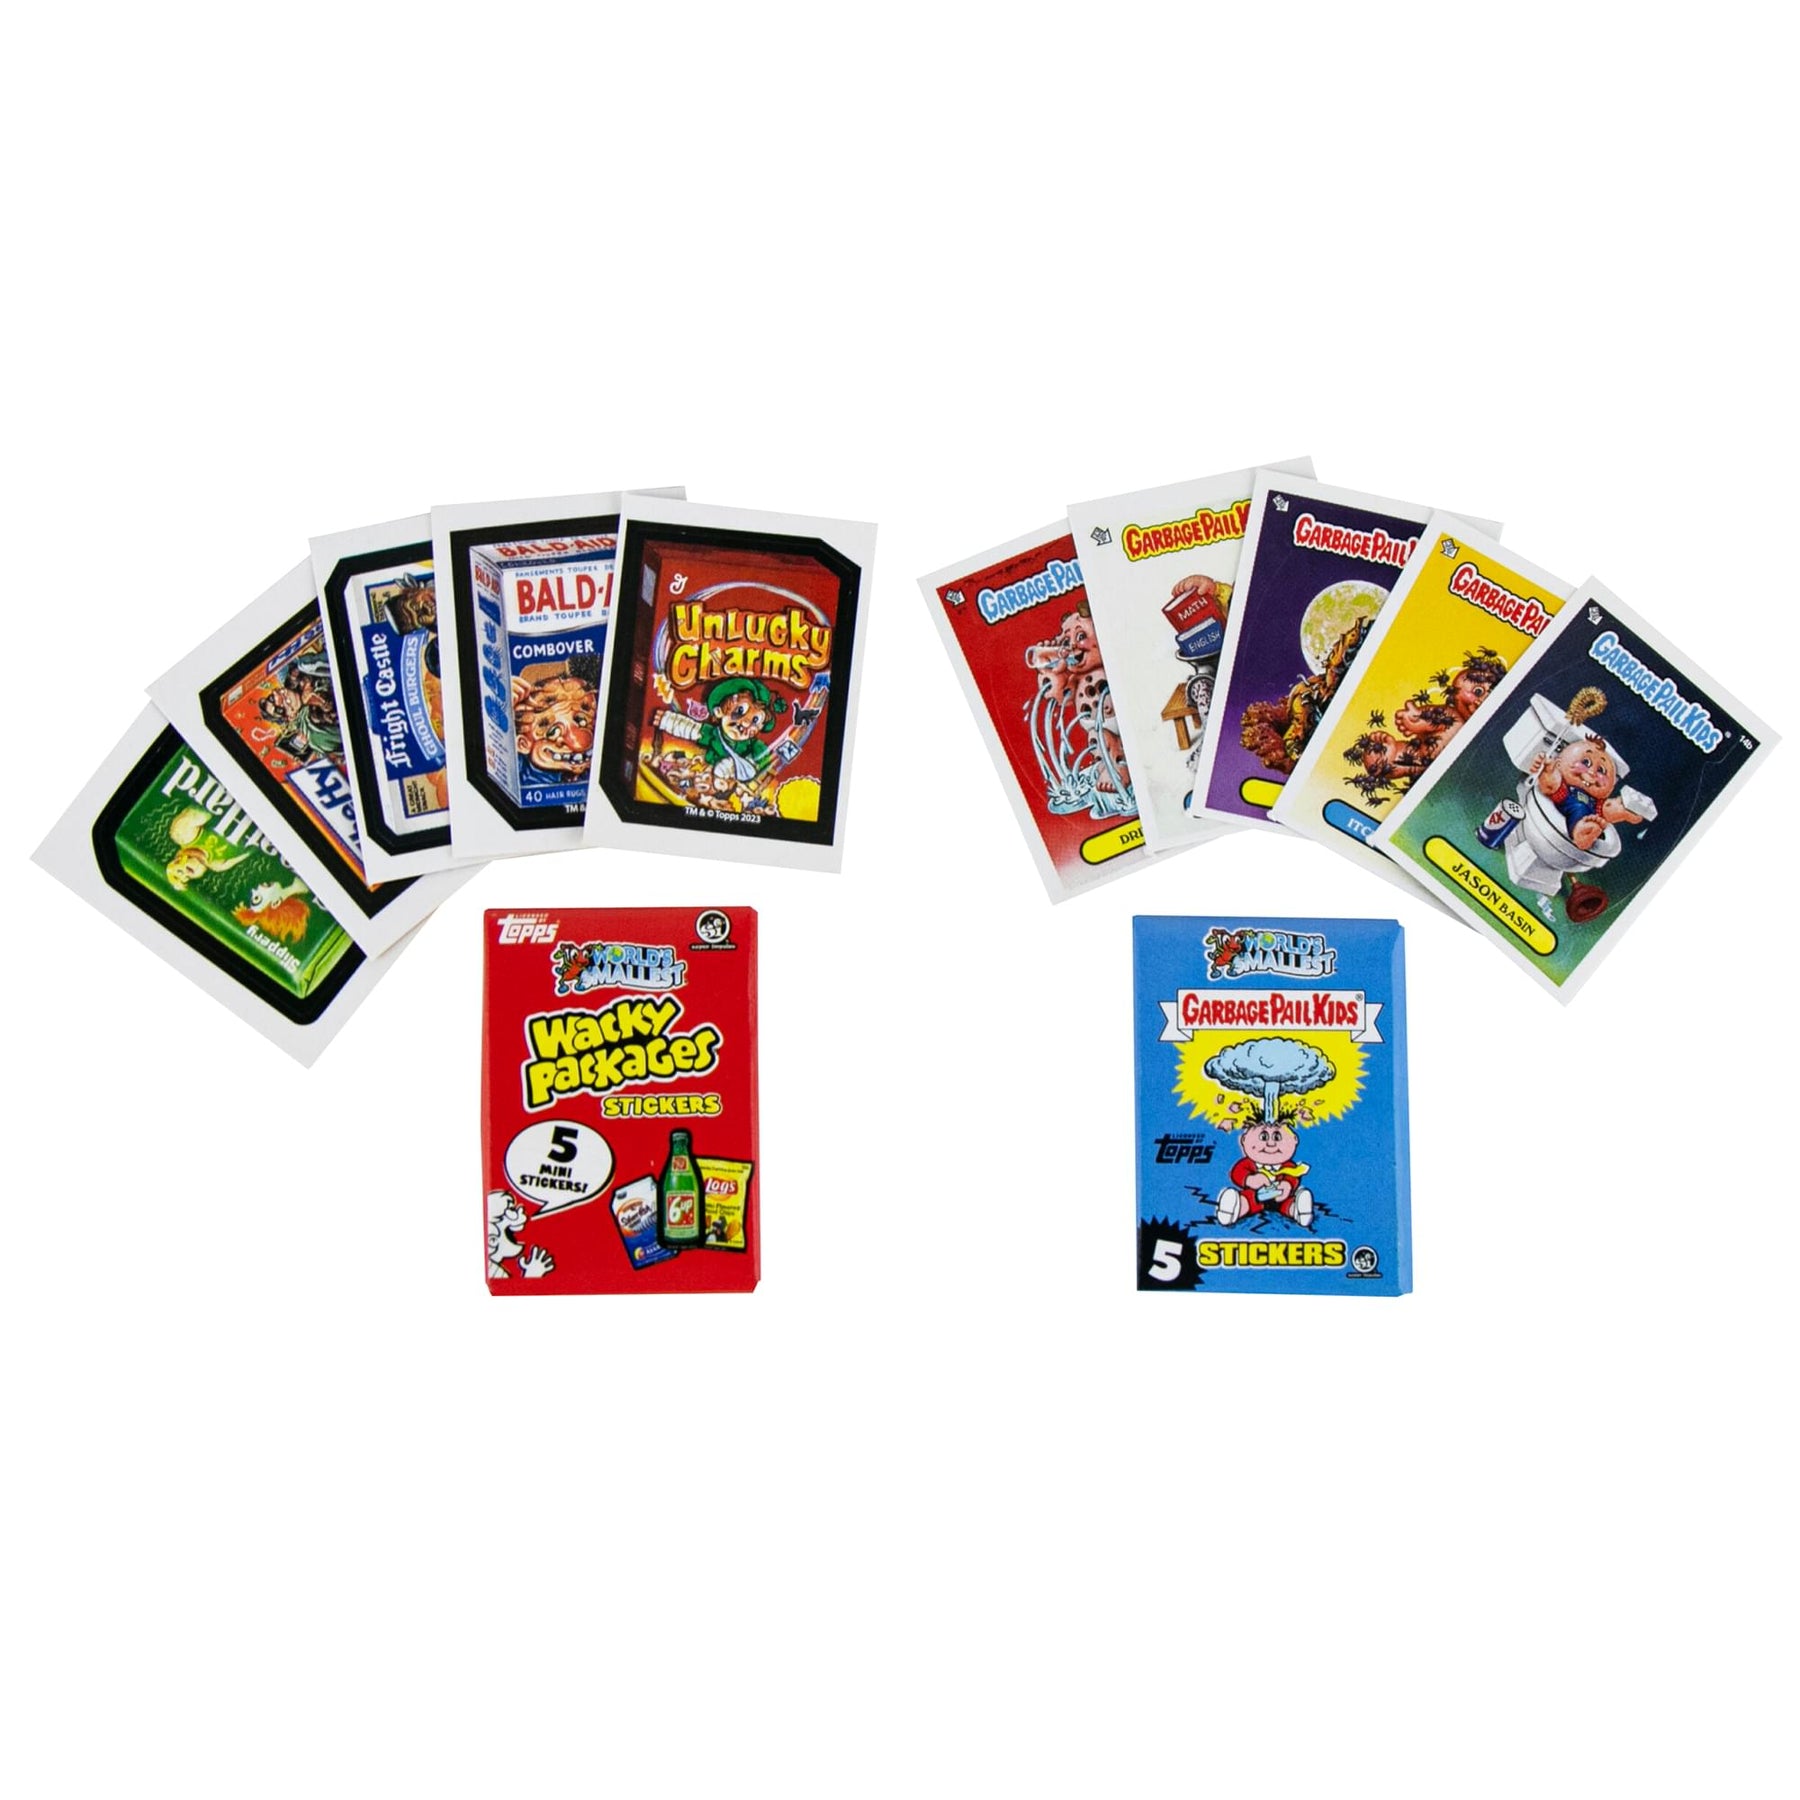 Worlds Smallest Topps Micro Cards Wacky Packages and GPK | One Random